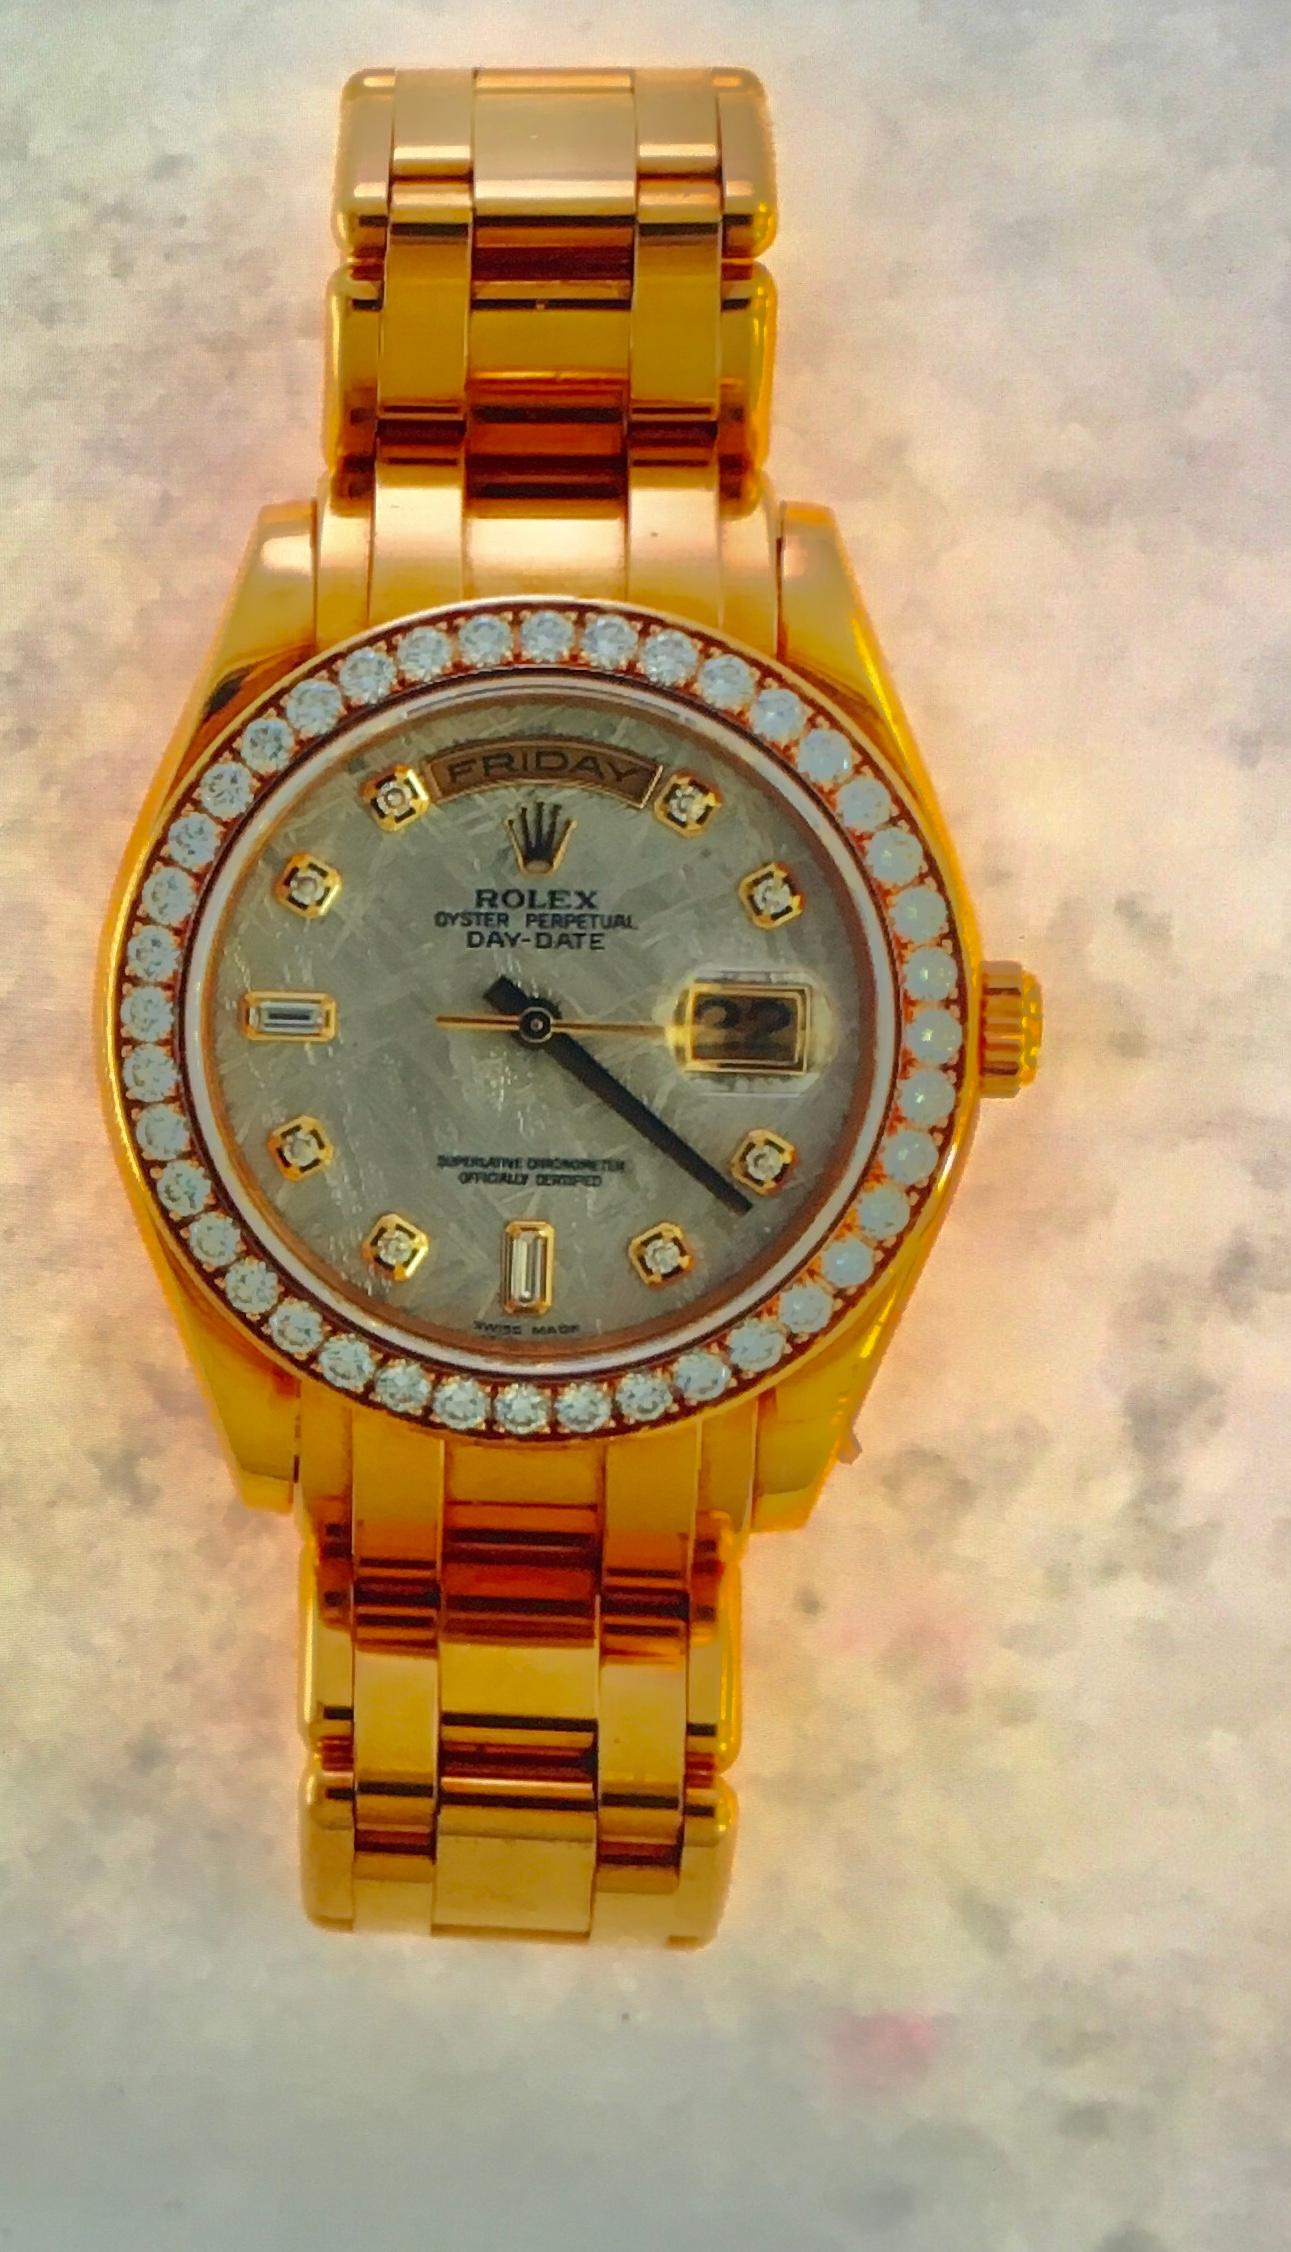 Authentic Rolex Unisex 18 karat Gold Master Piece, with the  Meteorite Diamond Dial Rear 2005. The current replacement list price is: $57,400 This is a 